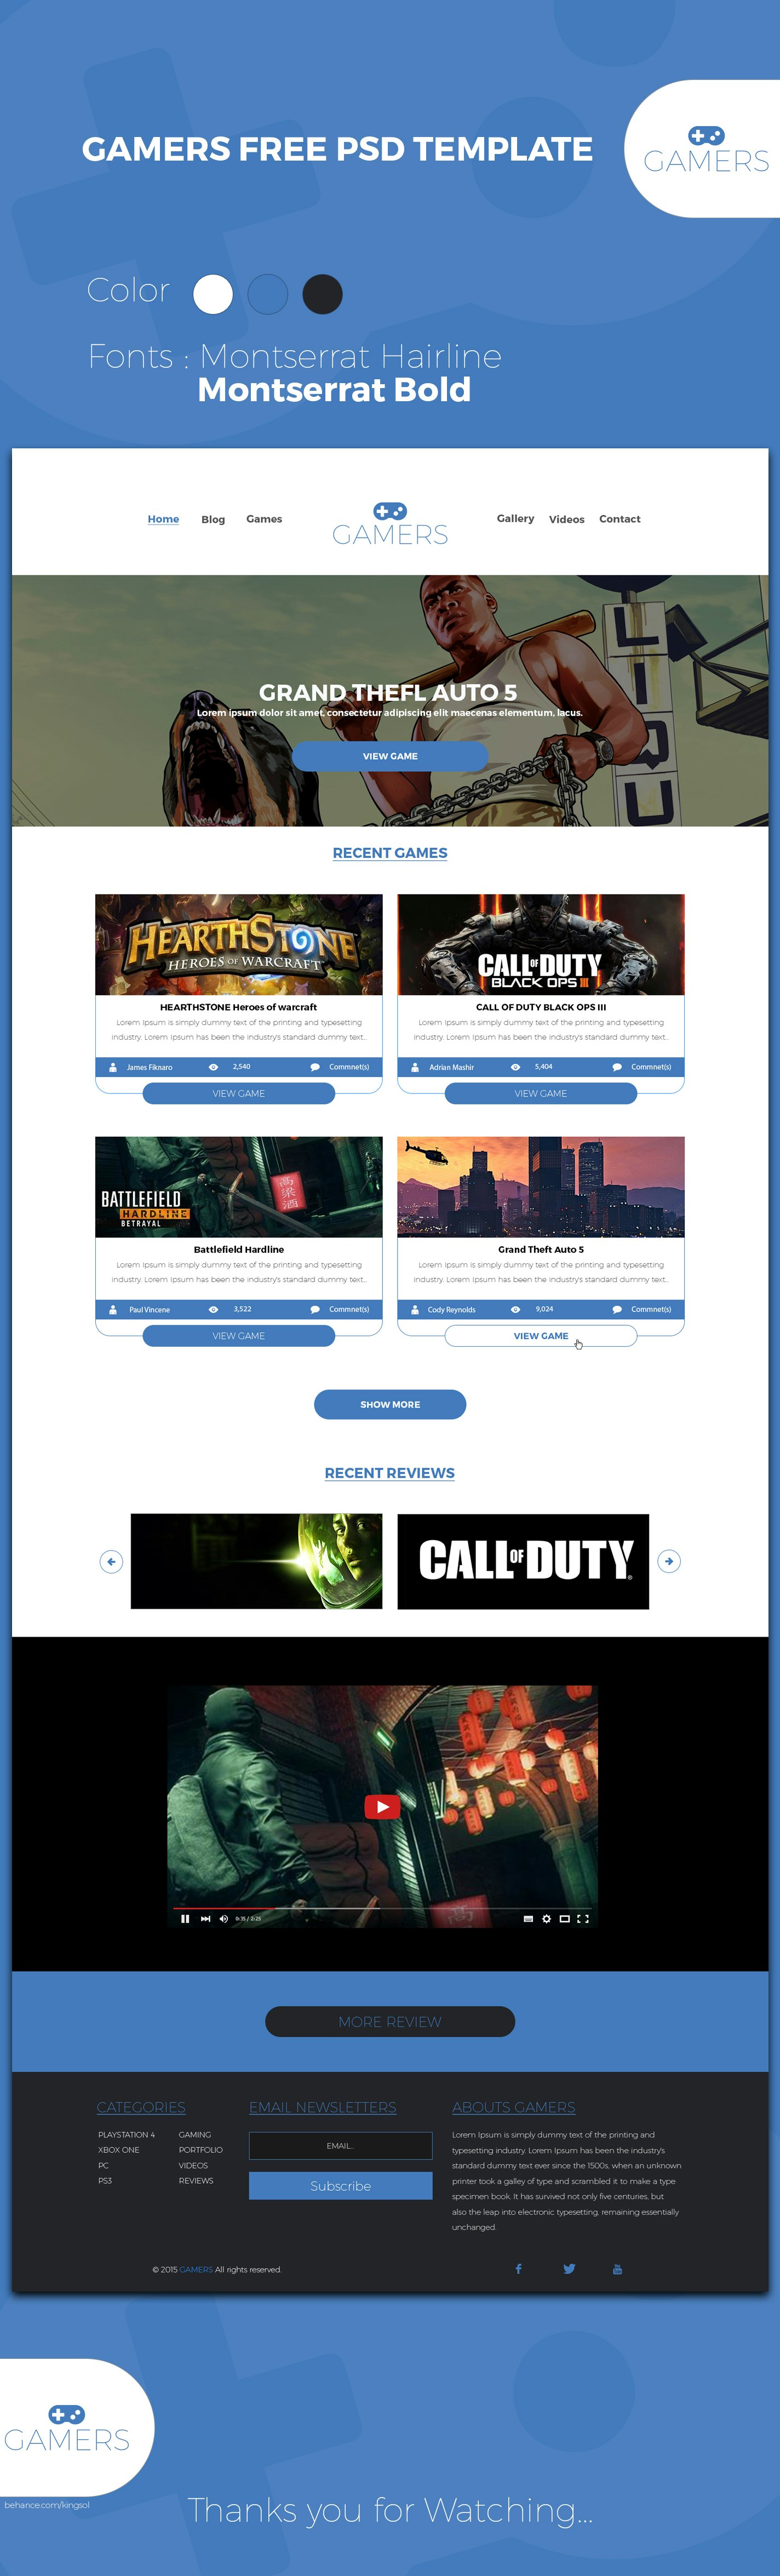 GAMERS Free PSD Template